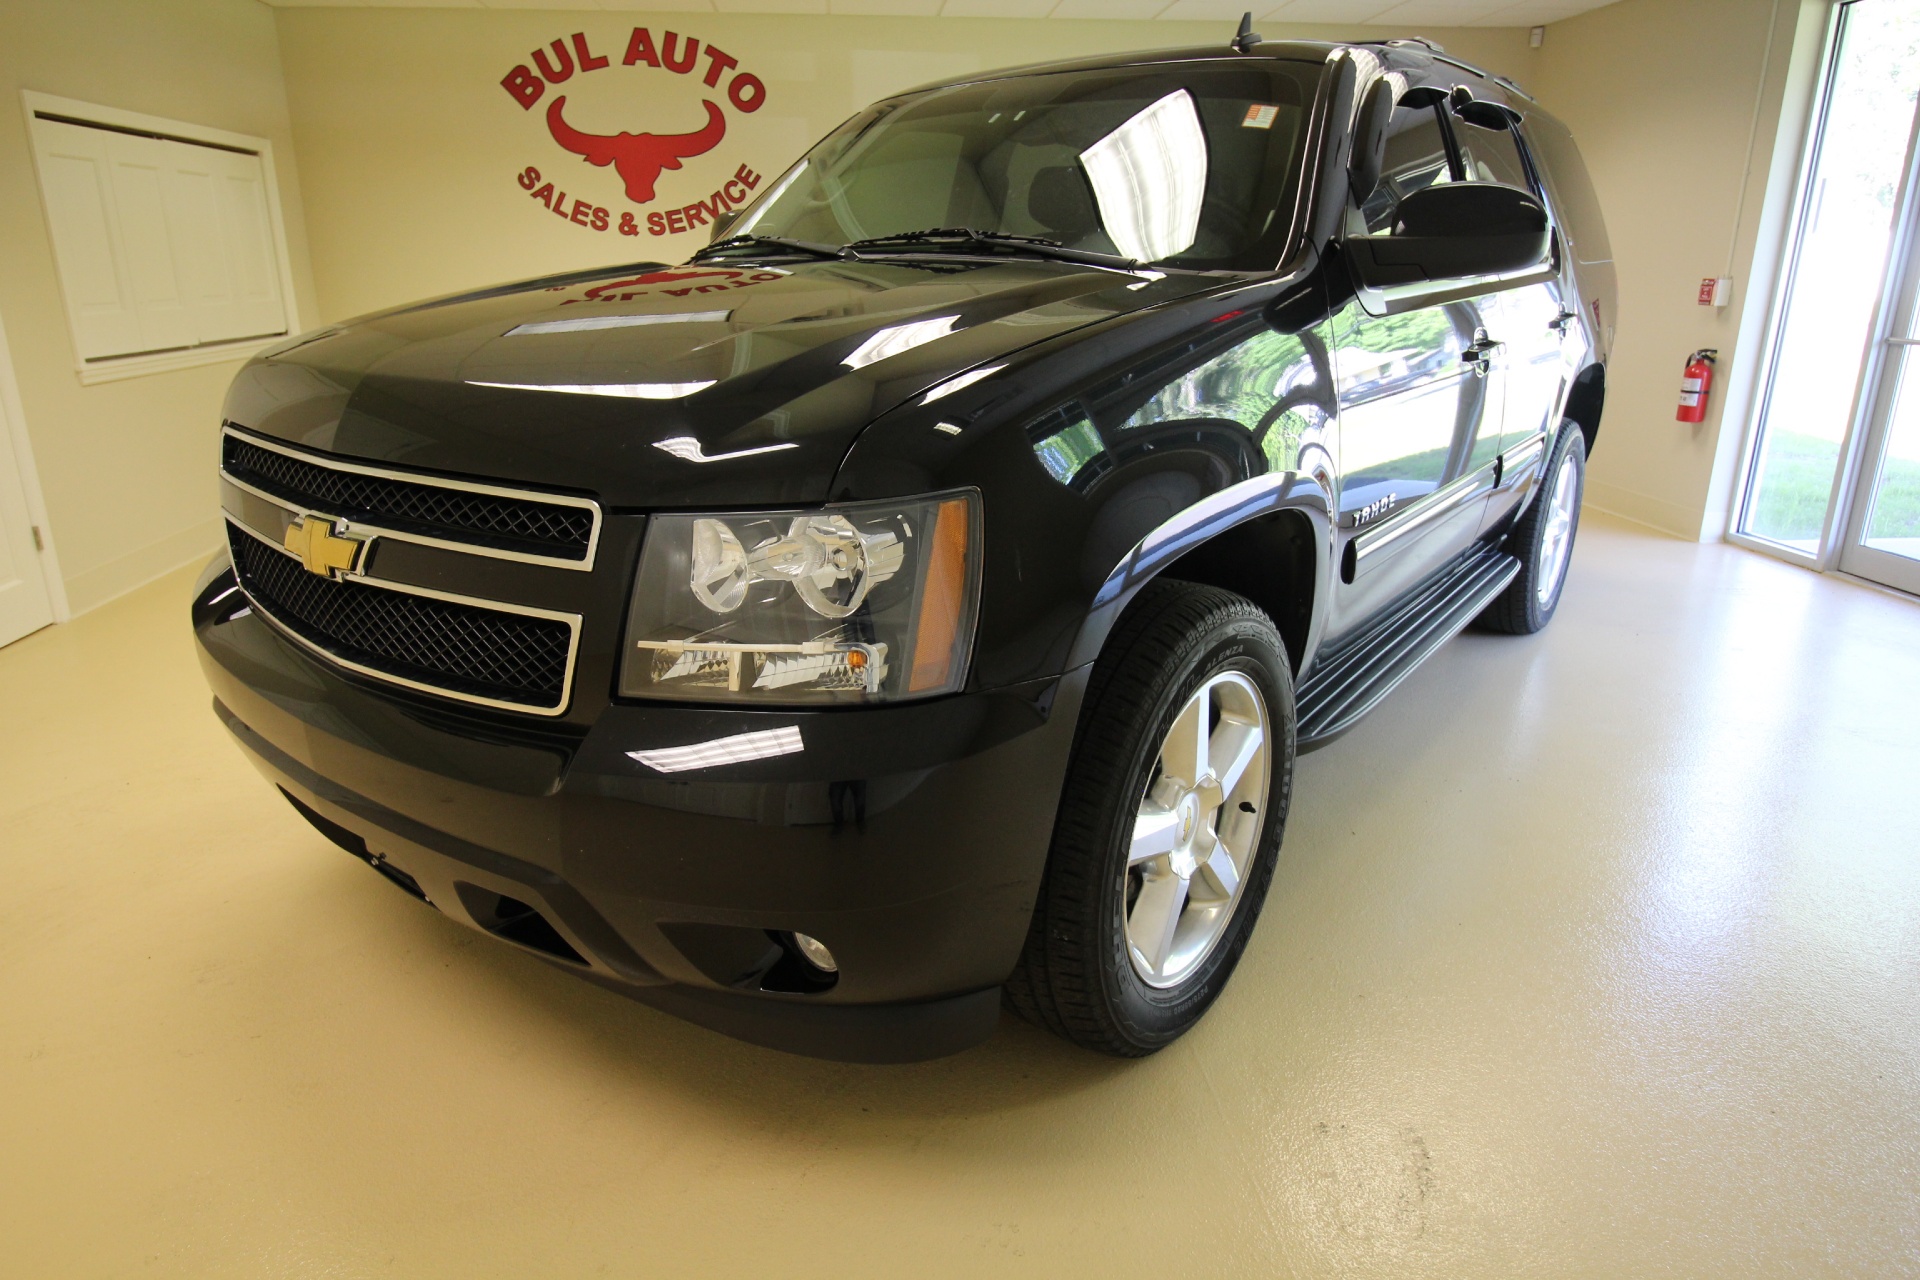 2011 Chevrolet Tahoe Lt Super Clean Loaded Leather Heated